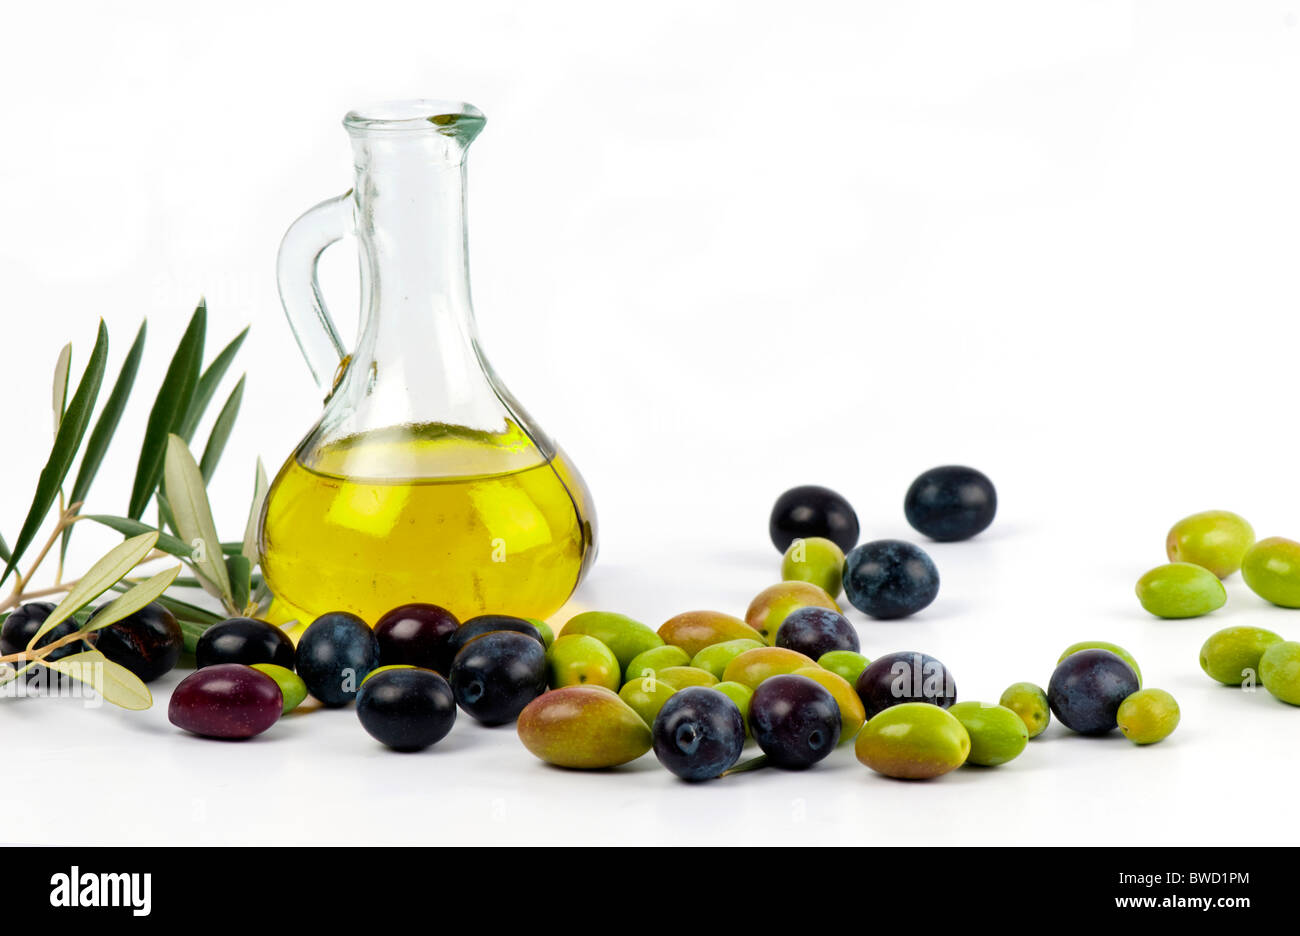 Cold pressed, extra virgin olive oil from Spain with a fresh crop of autumn picked green and black olives. On white. Stock Photo